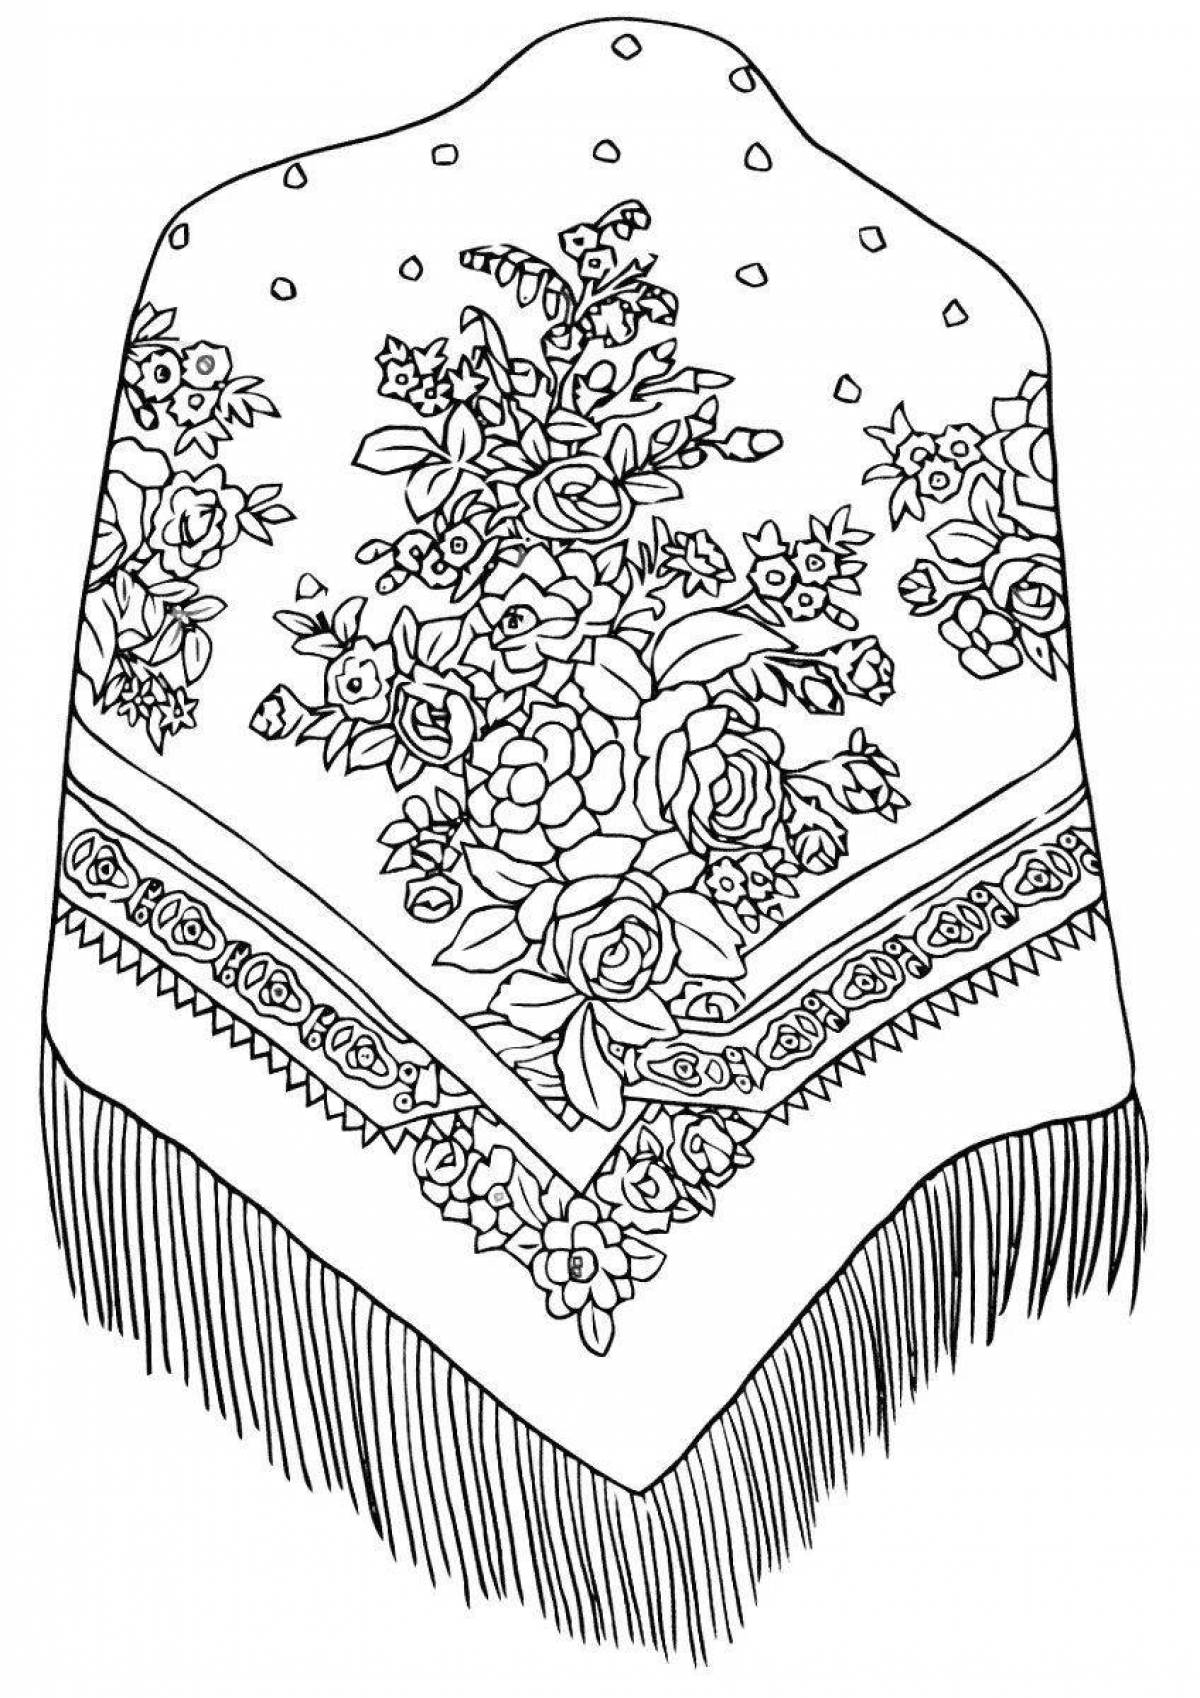 Dramatic pavlovian scarf coloring book for kids